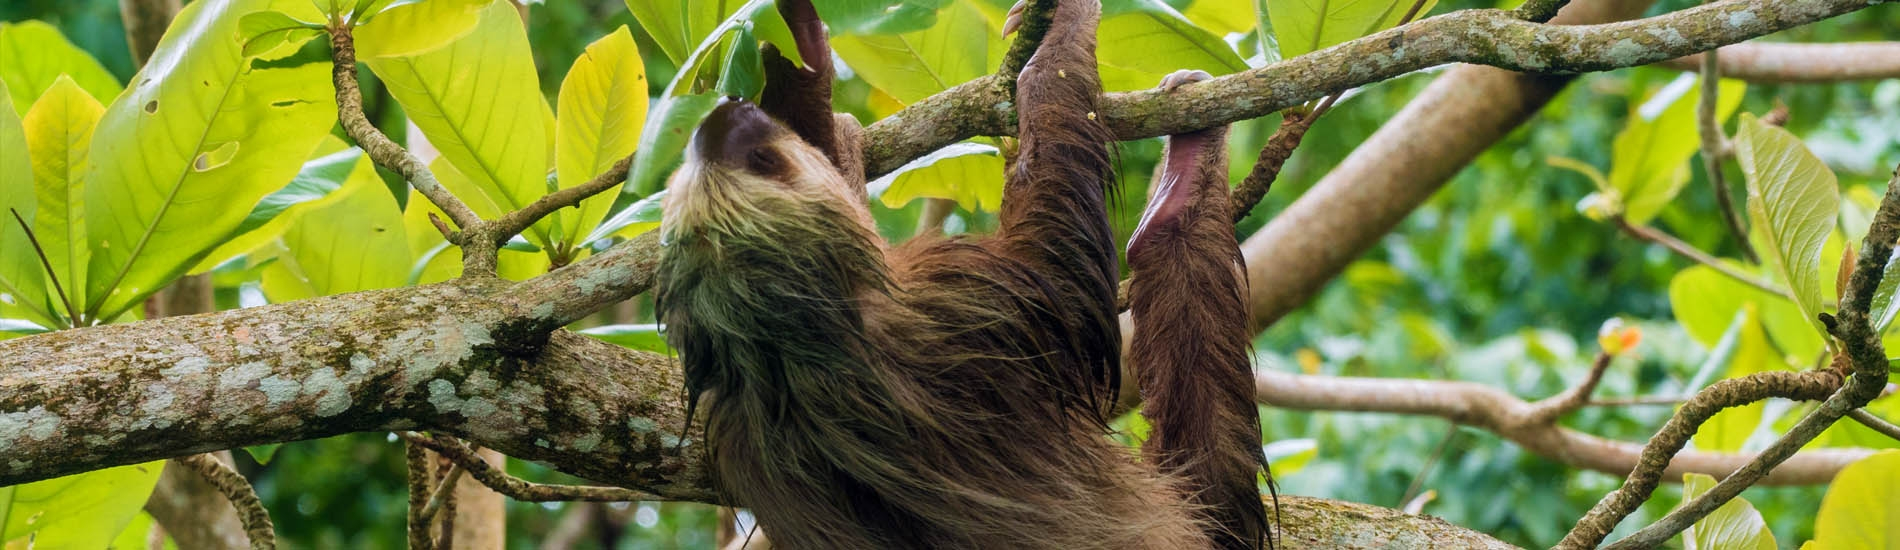 A view of savage Sloths